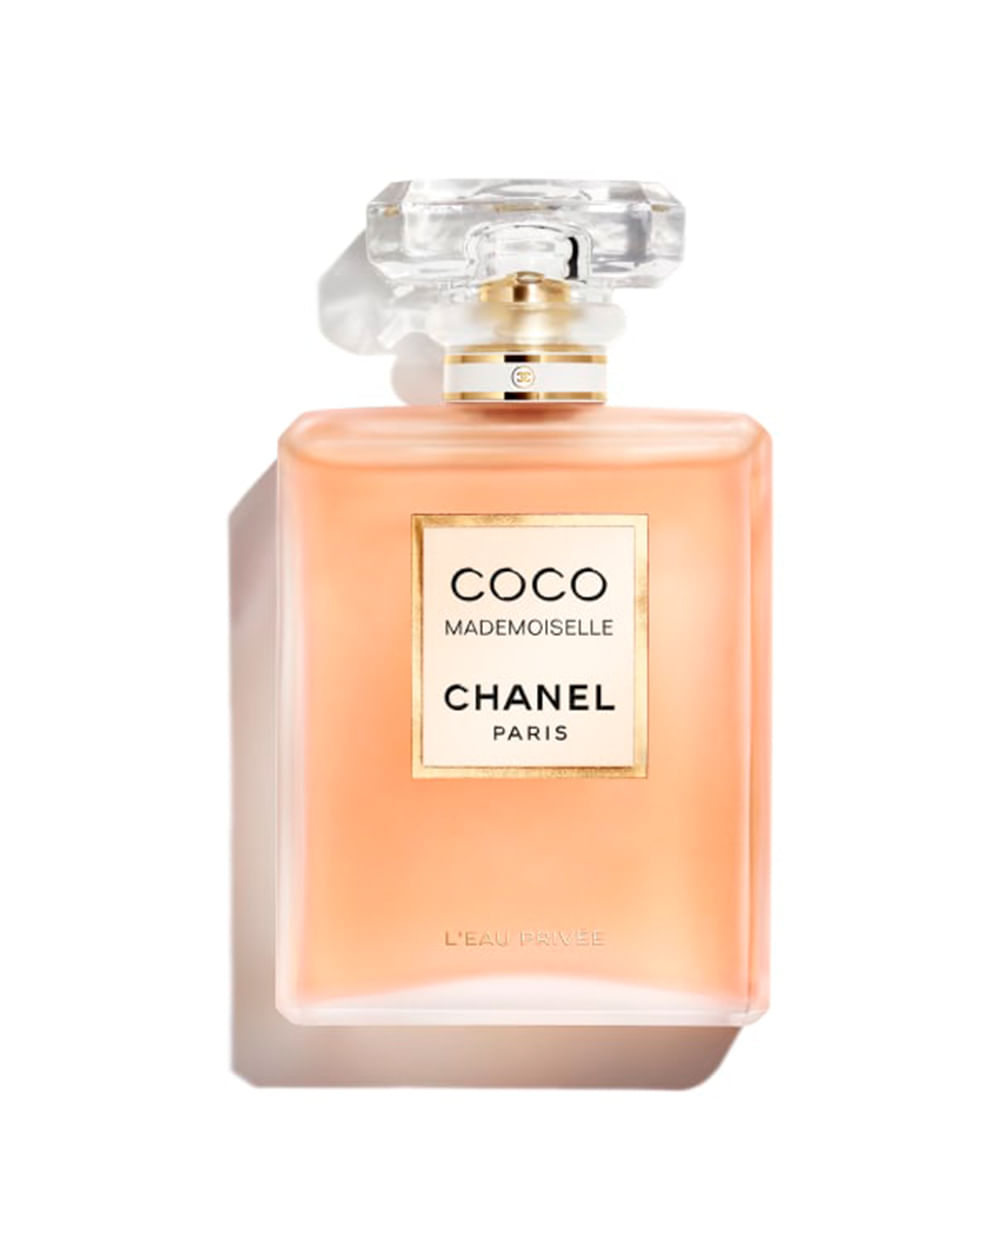 Coco Mademoiselle - Chanel